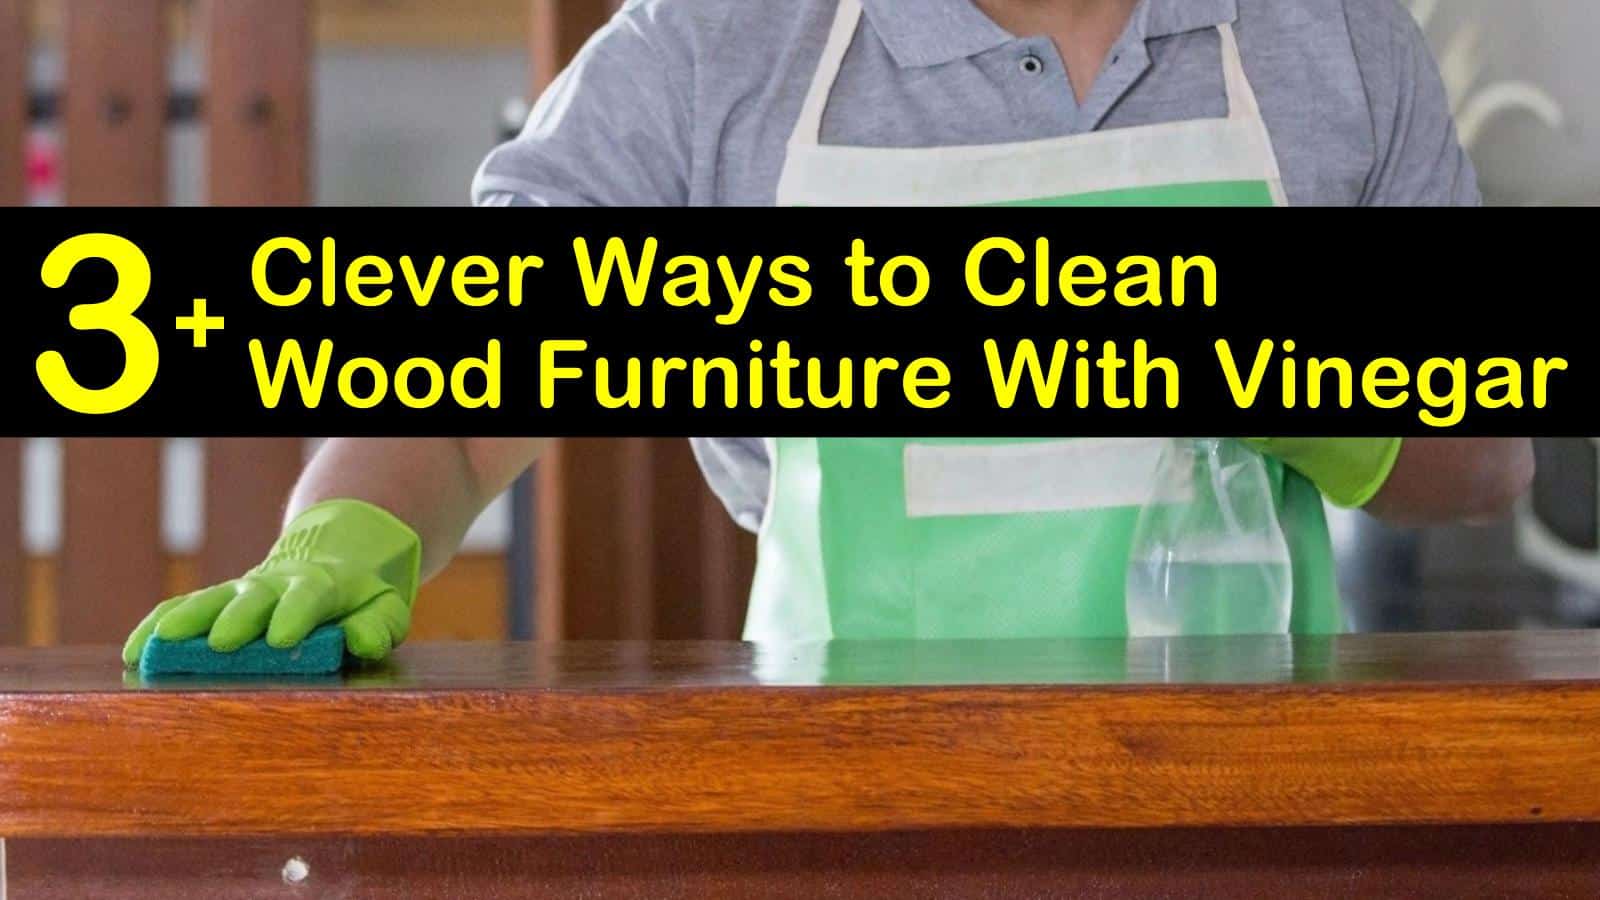 16+ Clever Ways to Clean Wood Furniture With Vinegar